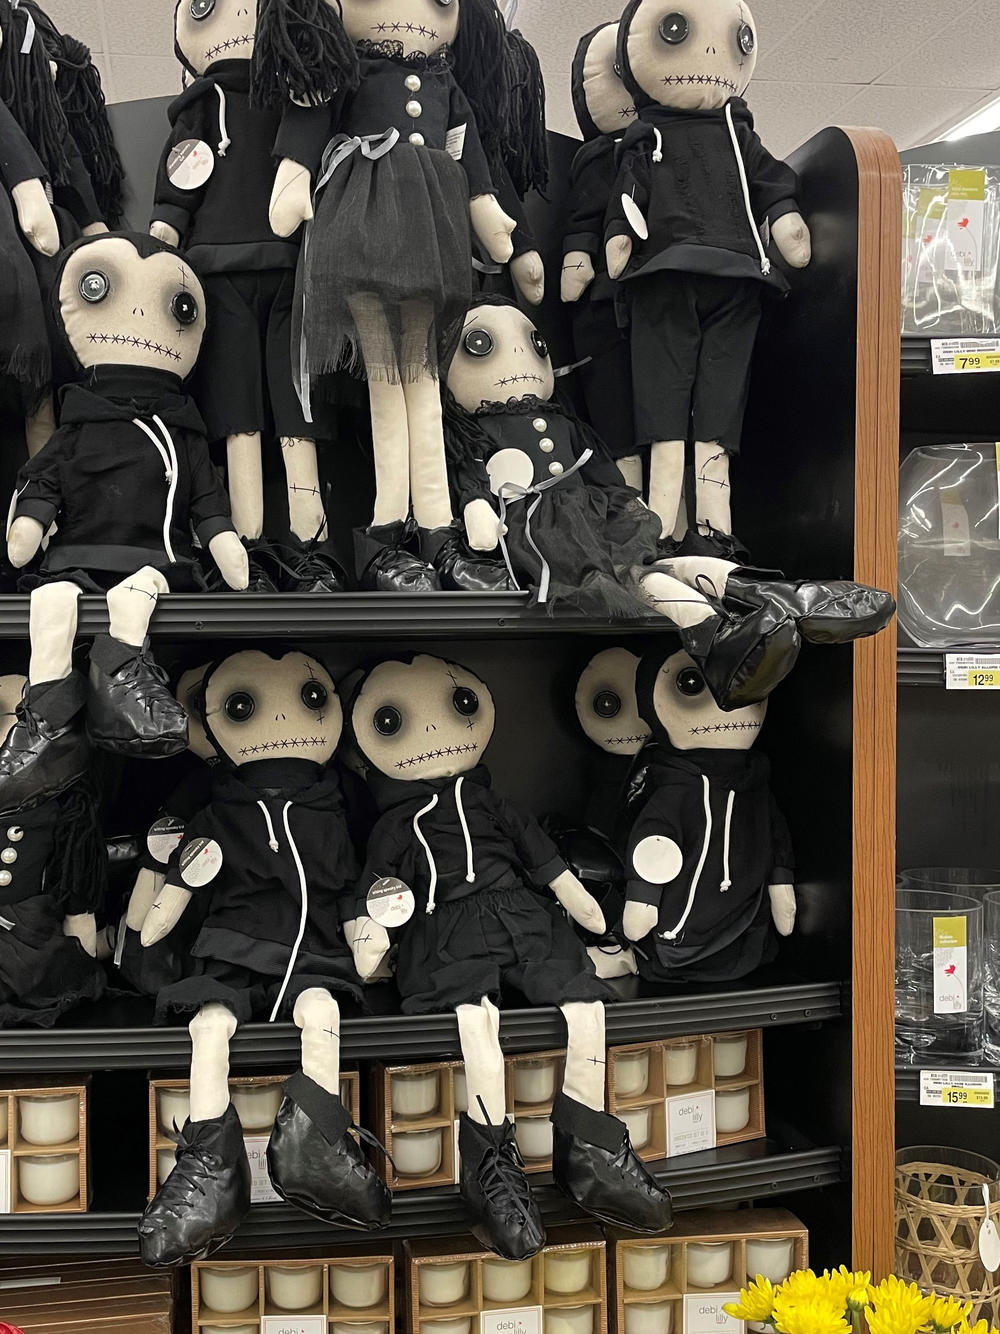 A shelf full of Goth dolls for sale at an Albertsons grocery store in Los Angeles.